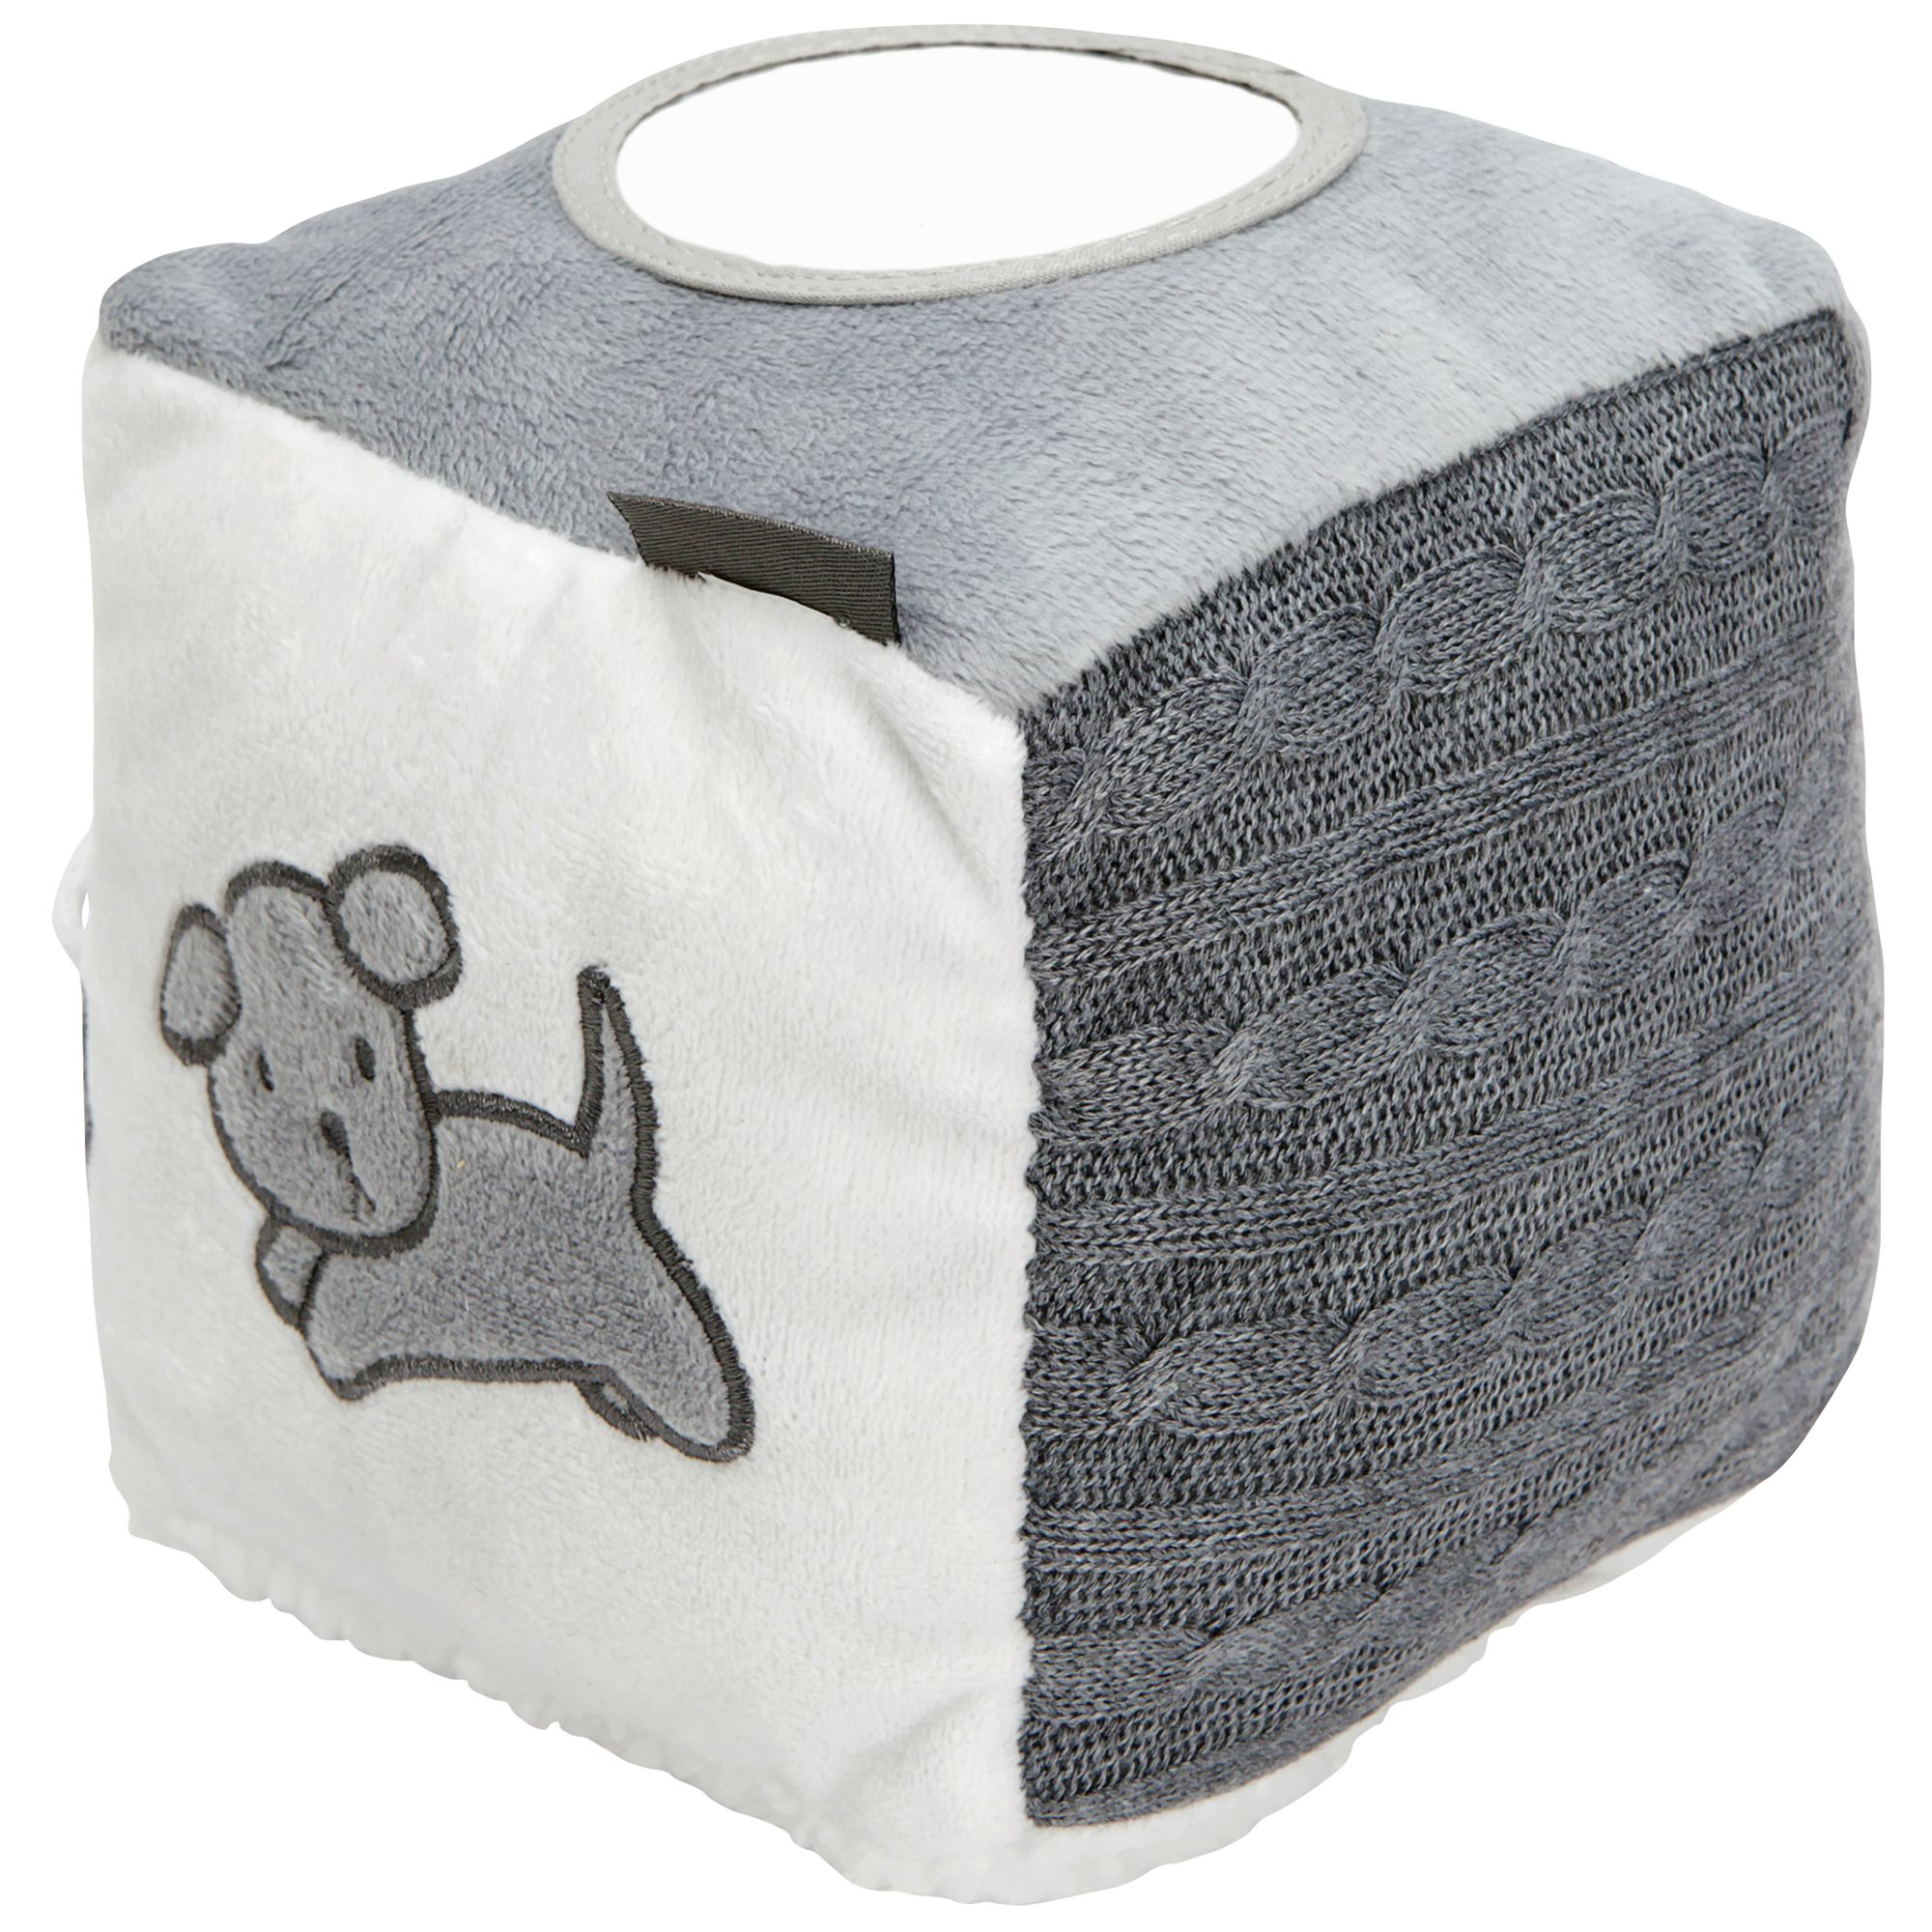 Miffy Knitted Activity Cube, Grey at John Lewis & Partners